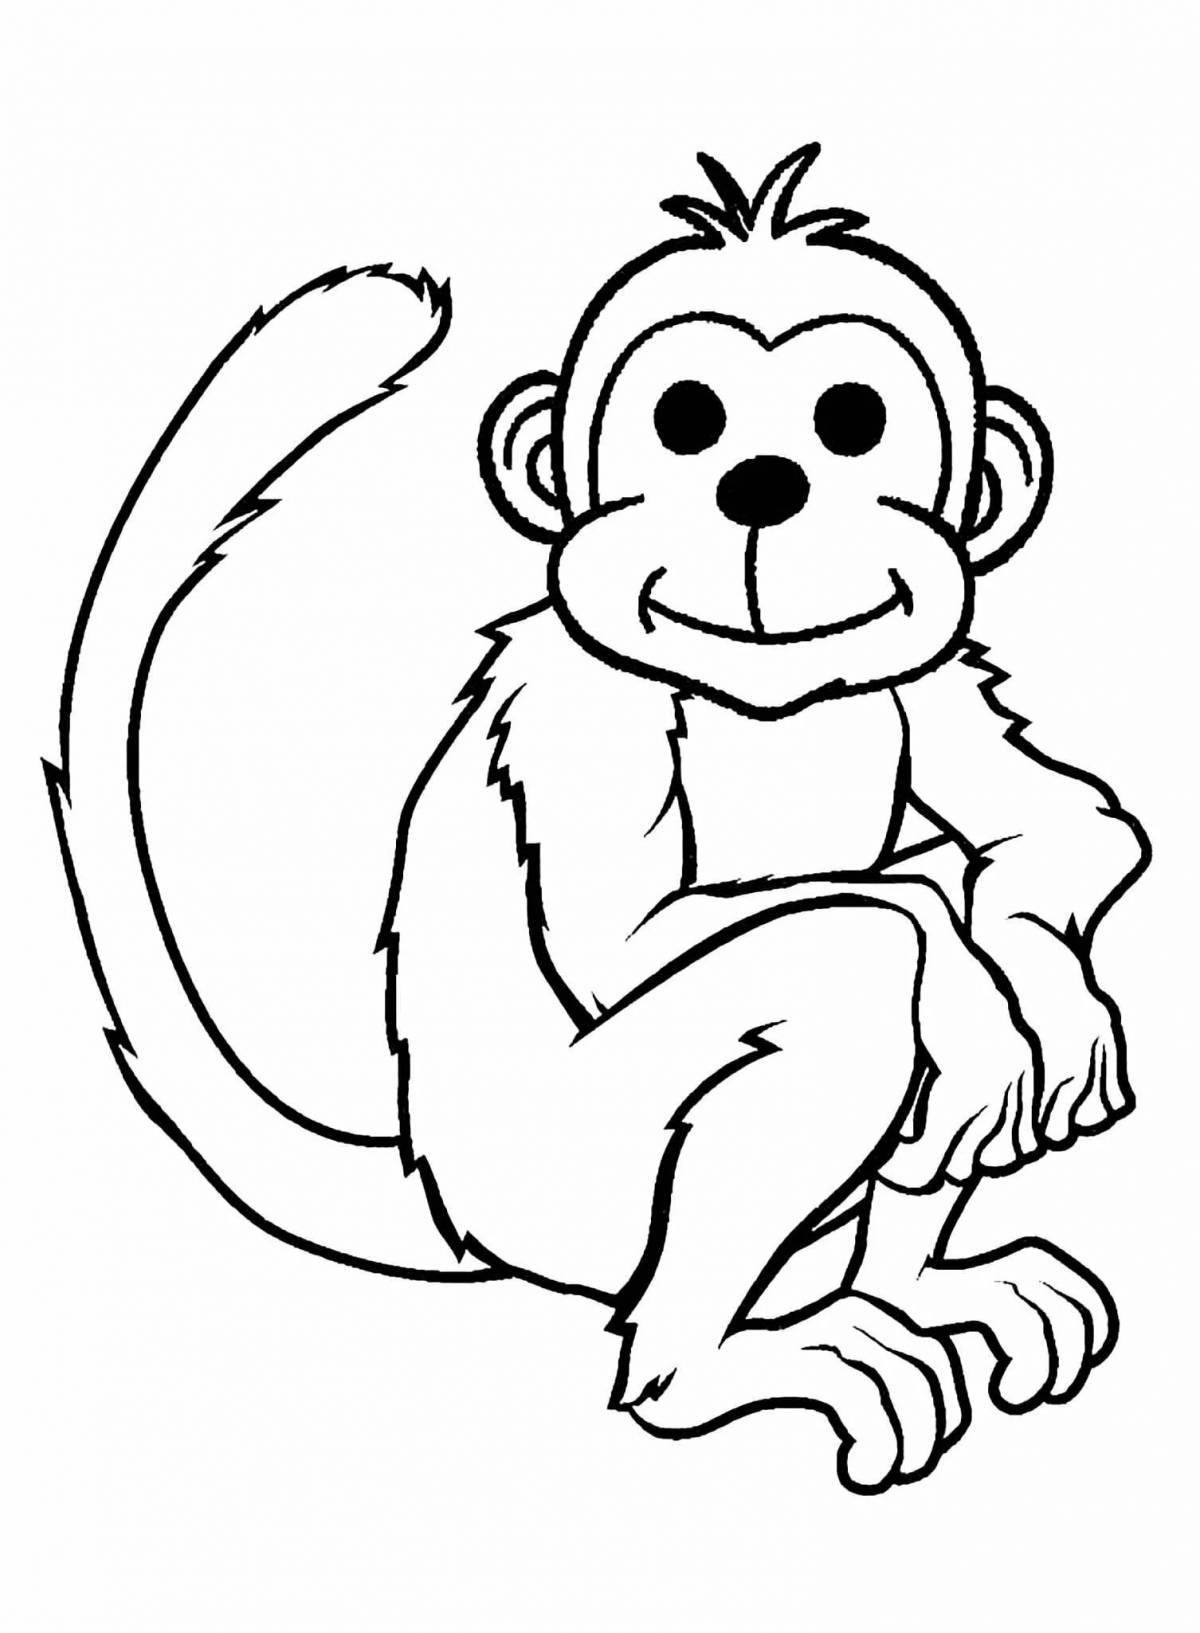 Adorable monkey drawing for kids